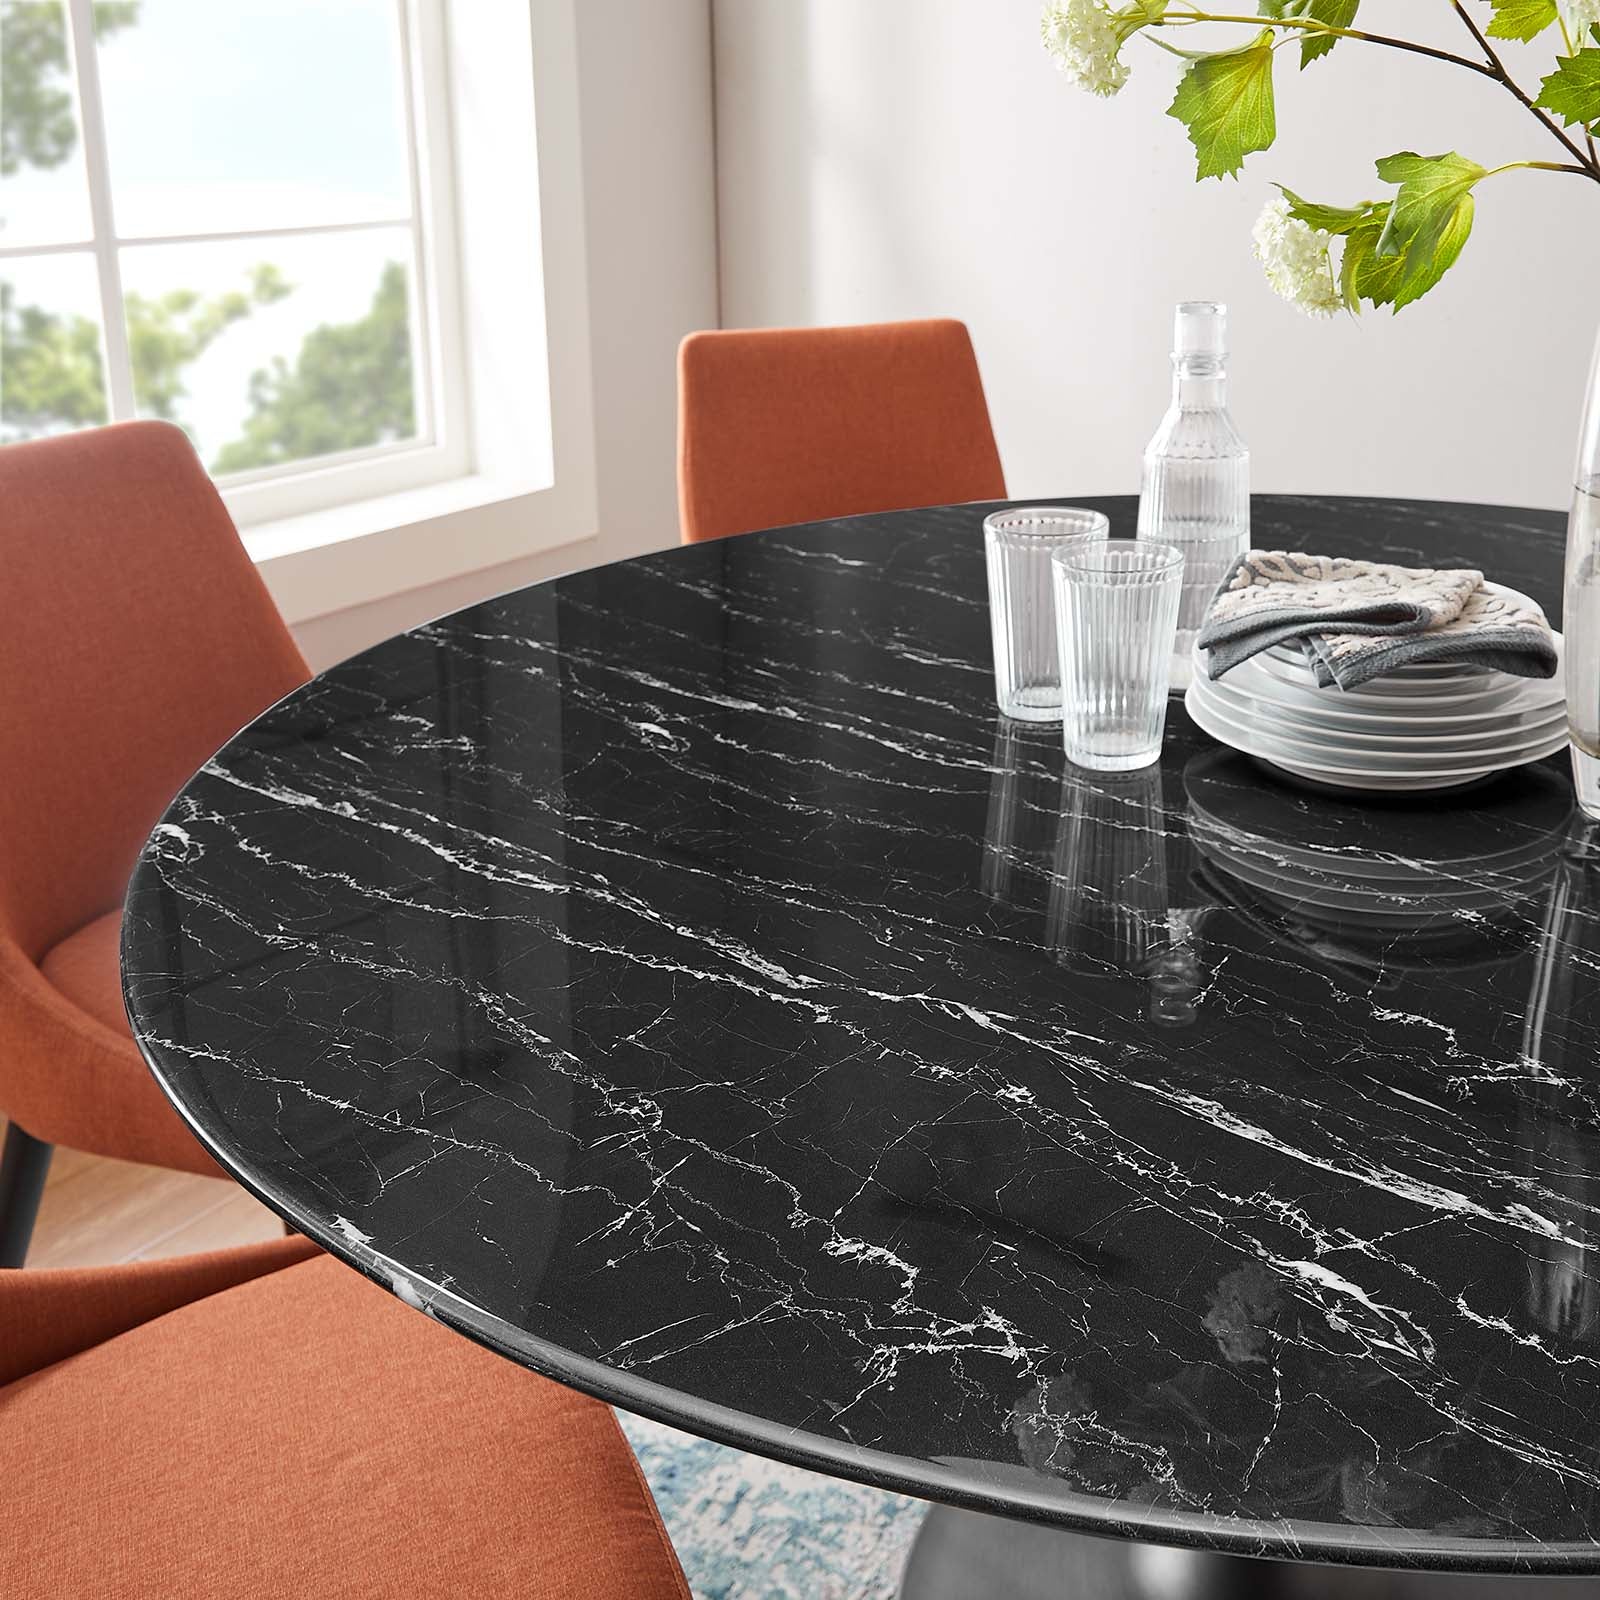 Lippa 60" Artificial Marble Dining Table